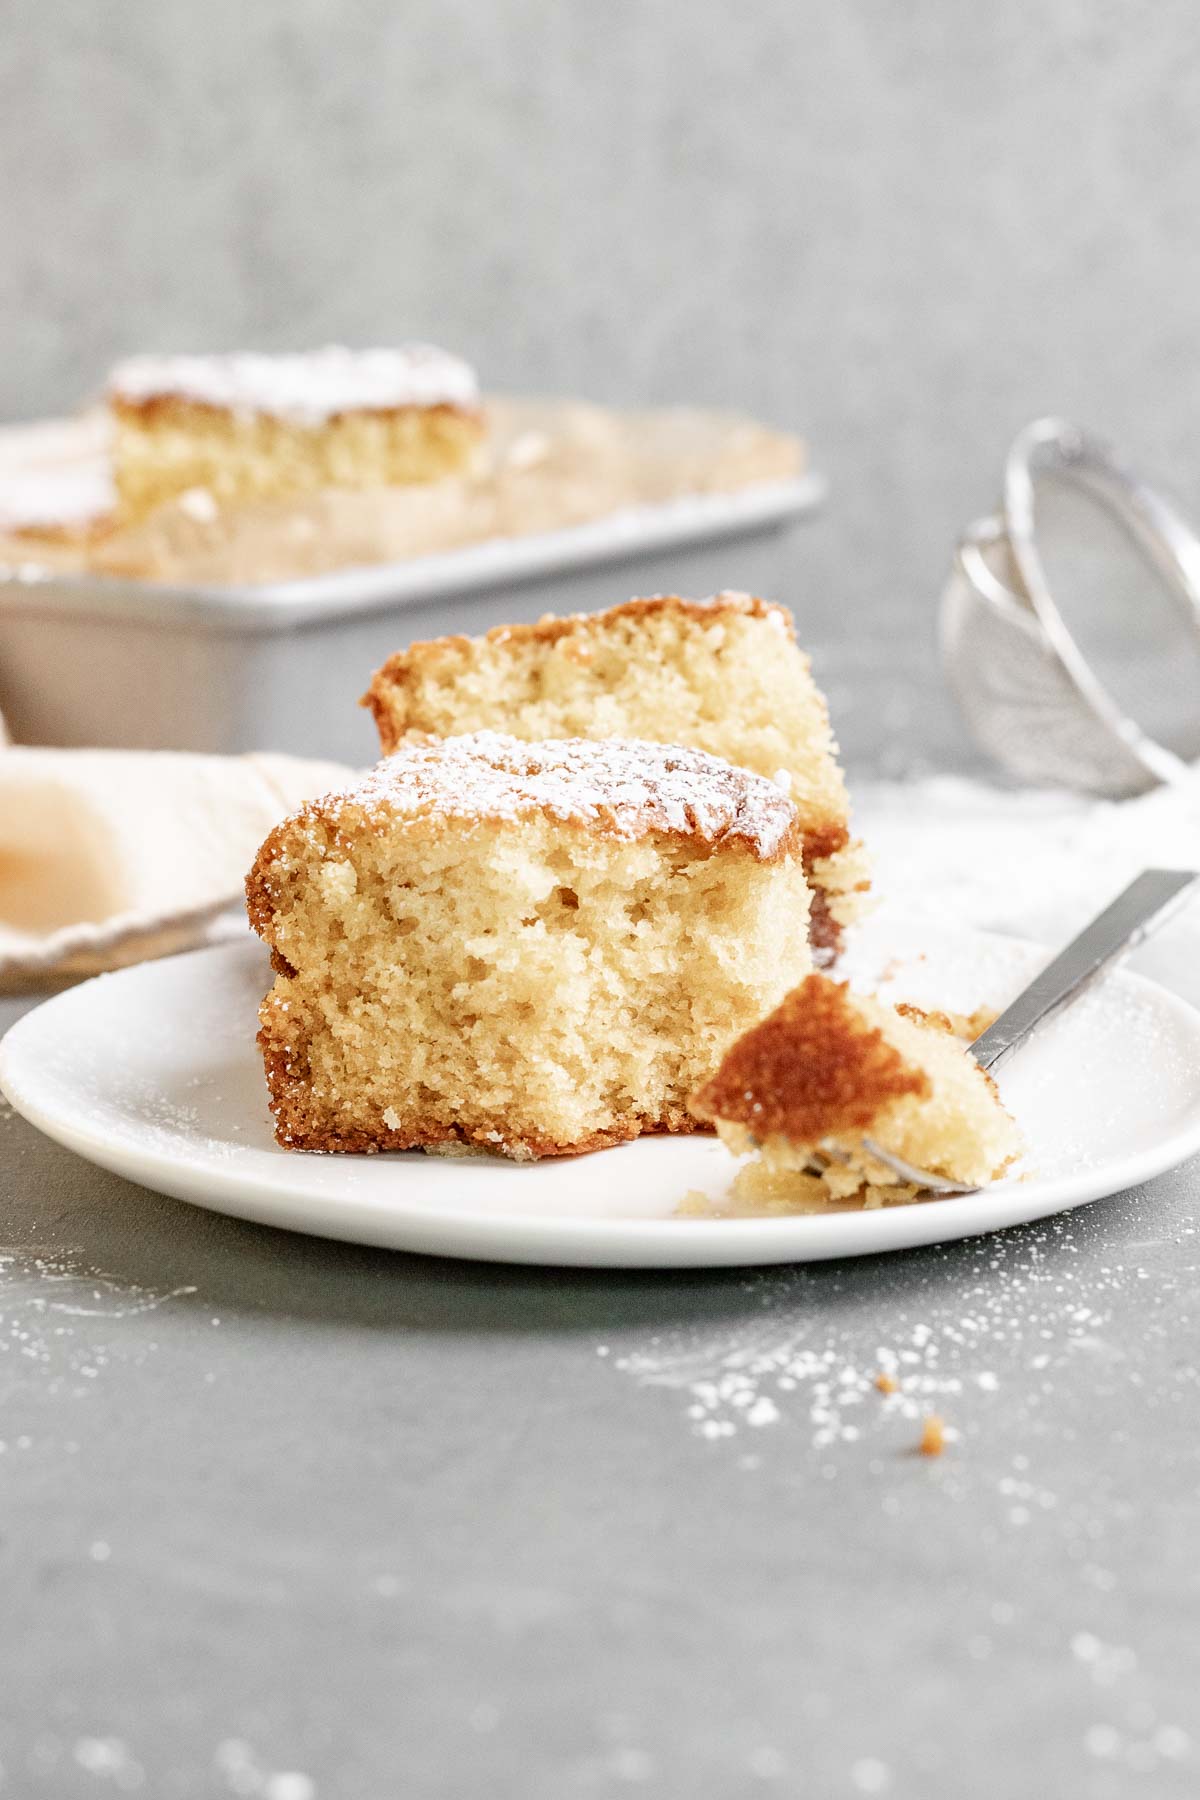 Butter Cake dusted with powdered sugar sliced on plate with fork